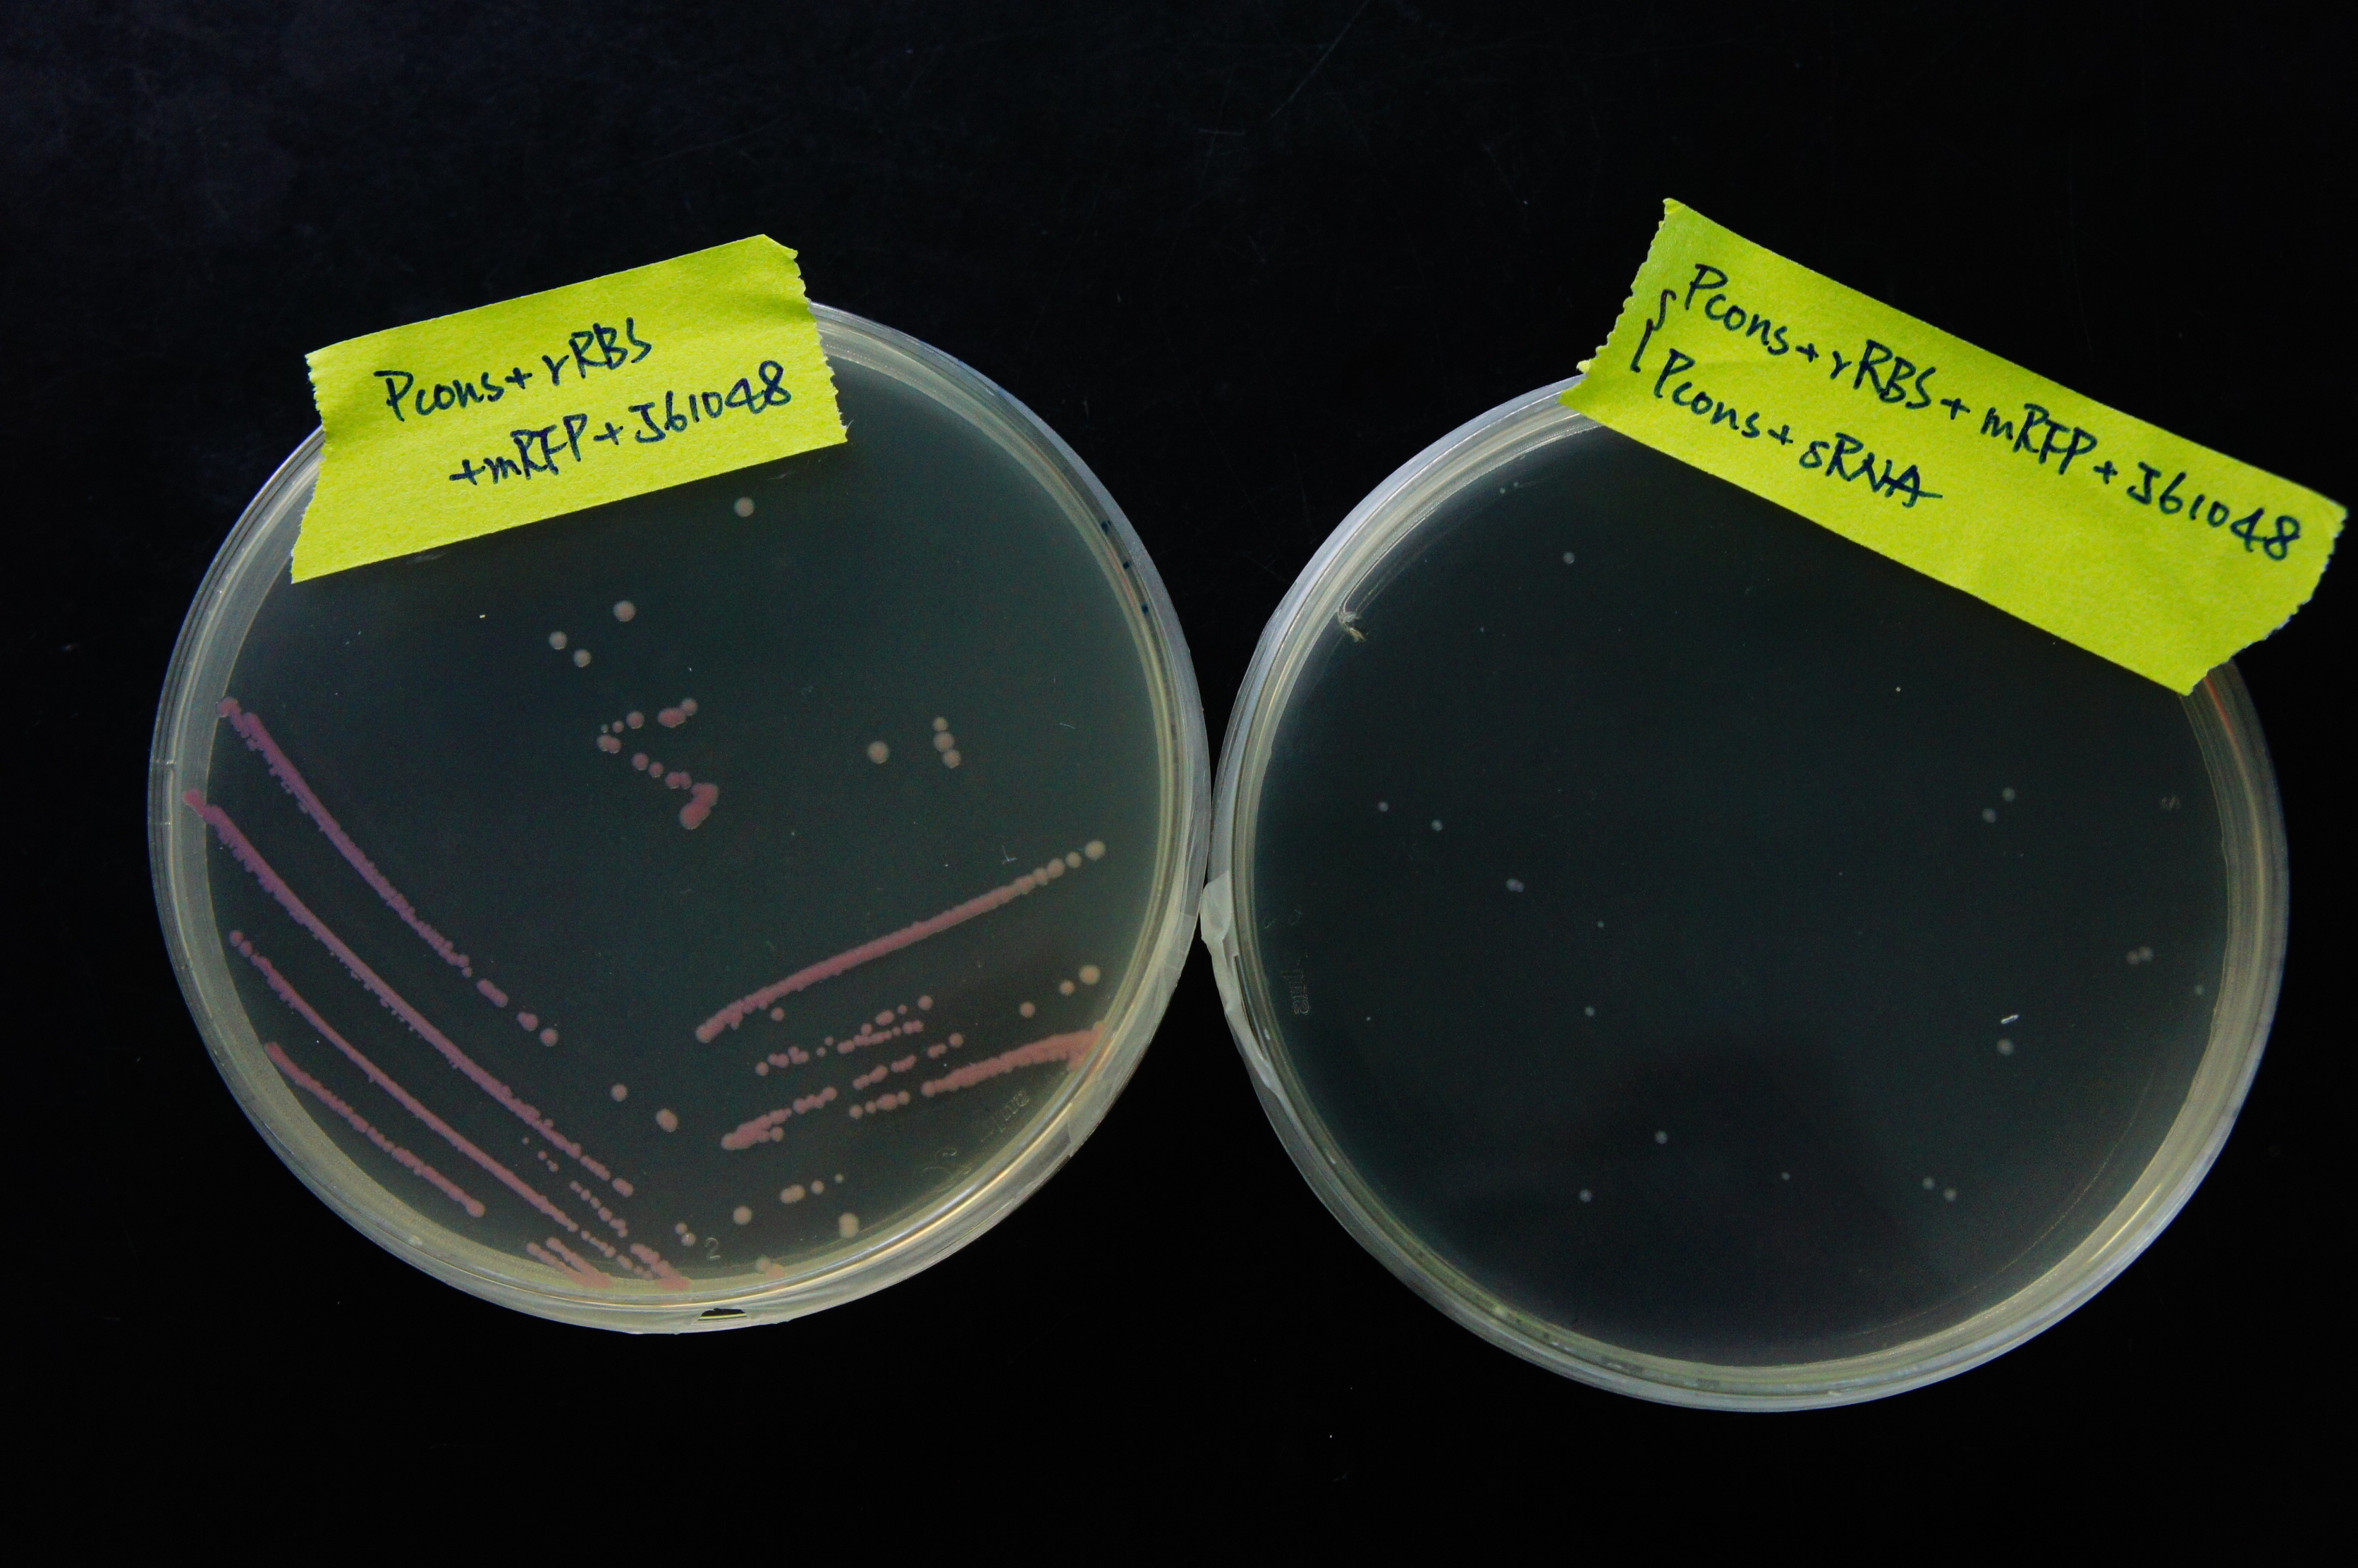 Figure 15. The bacterial colonies with sRNA shows no clear sign of RFP expression, while the colonies without sRNA do.